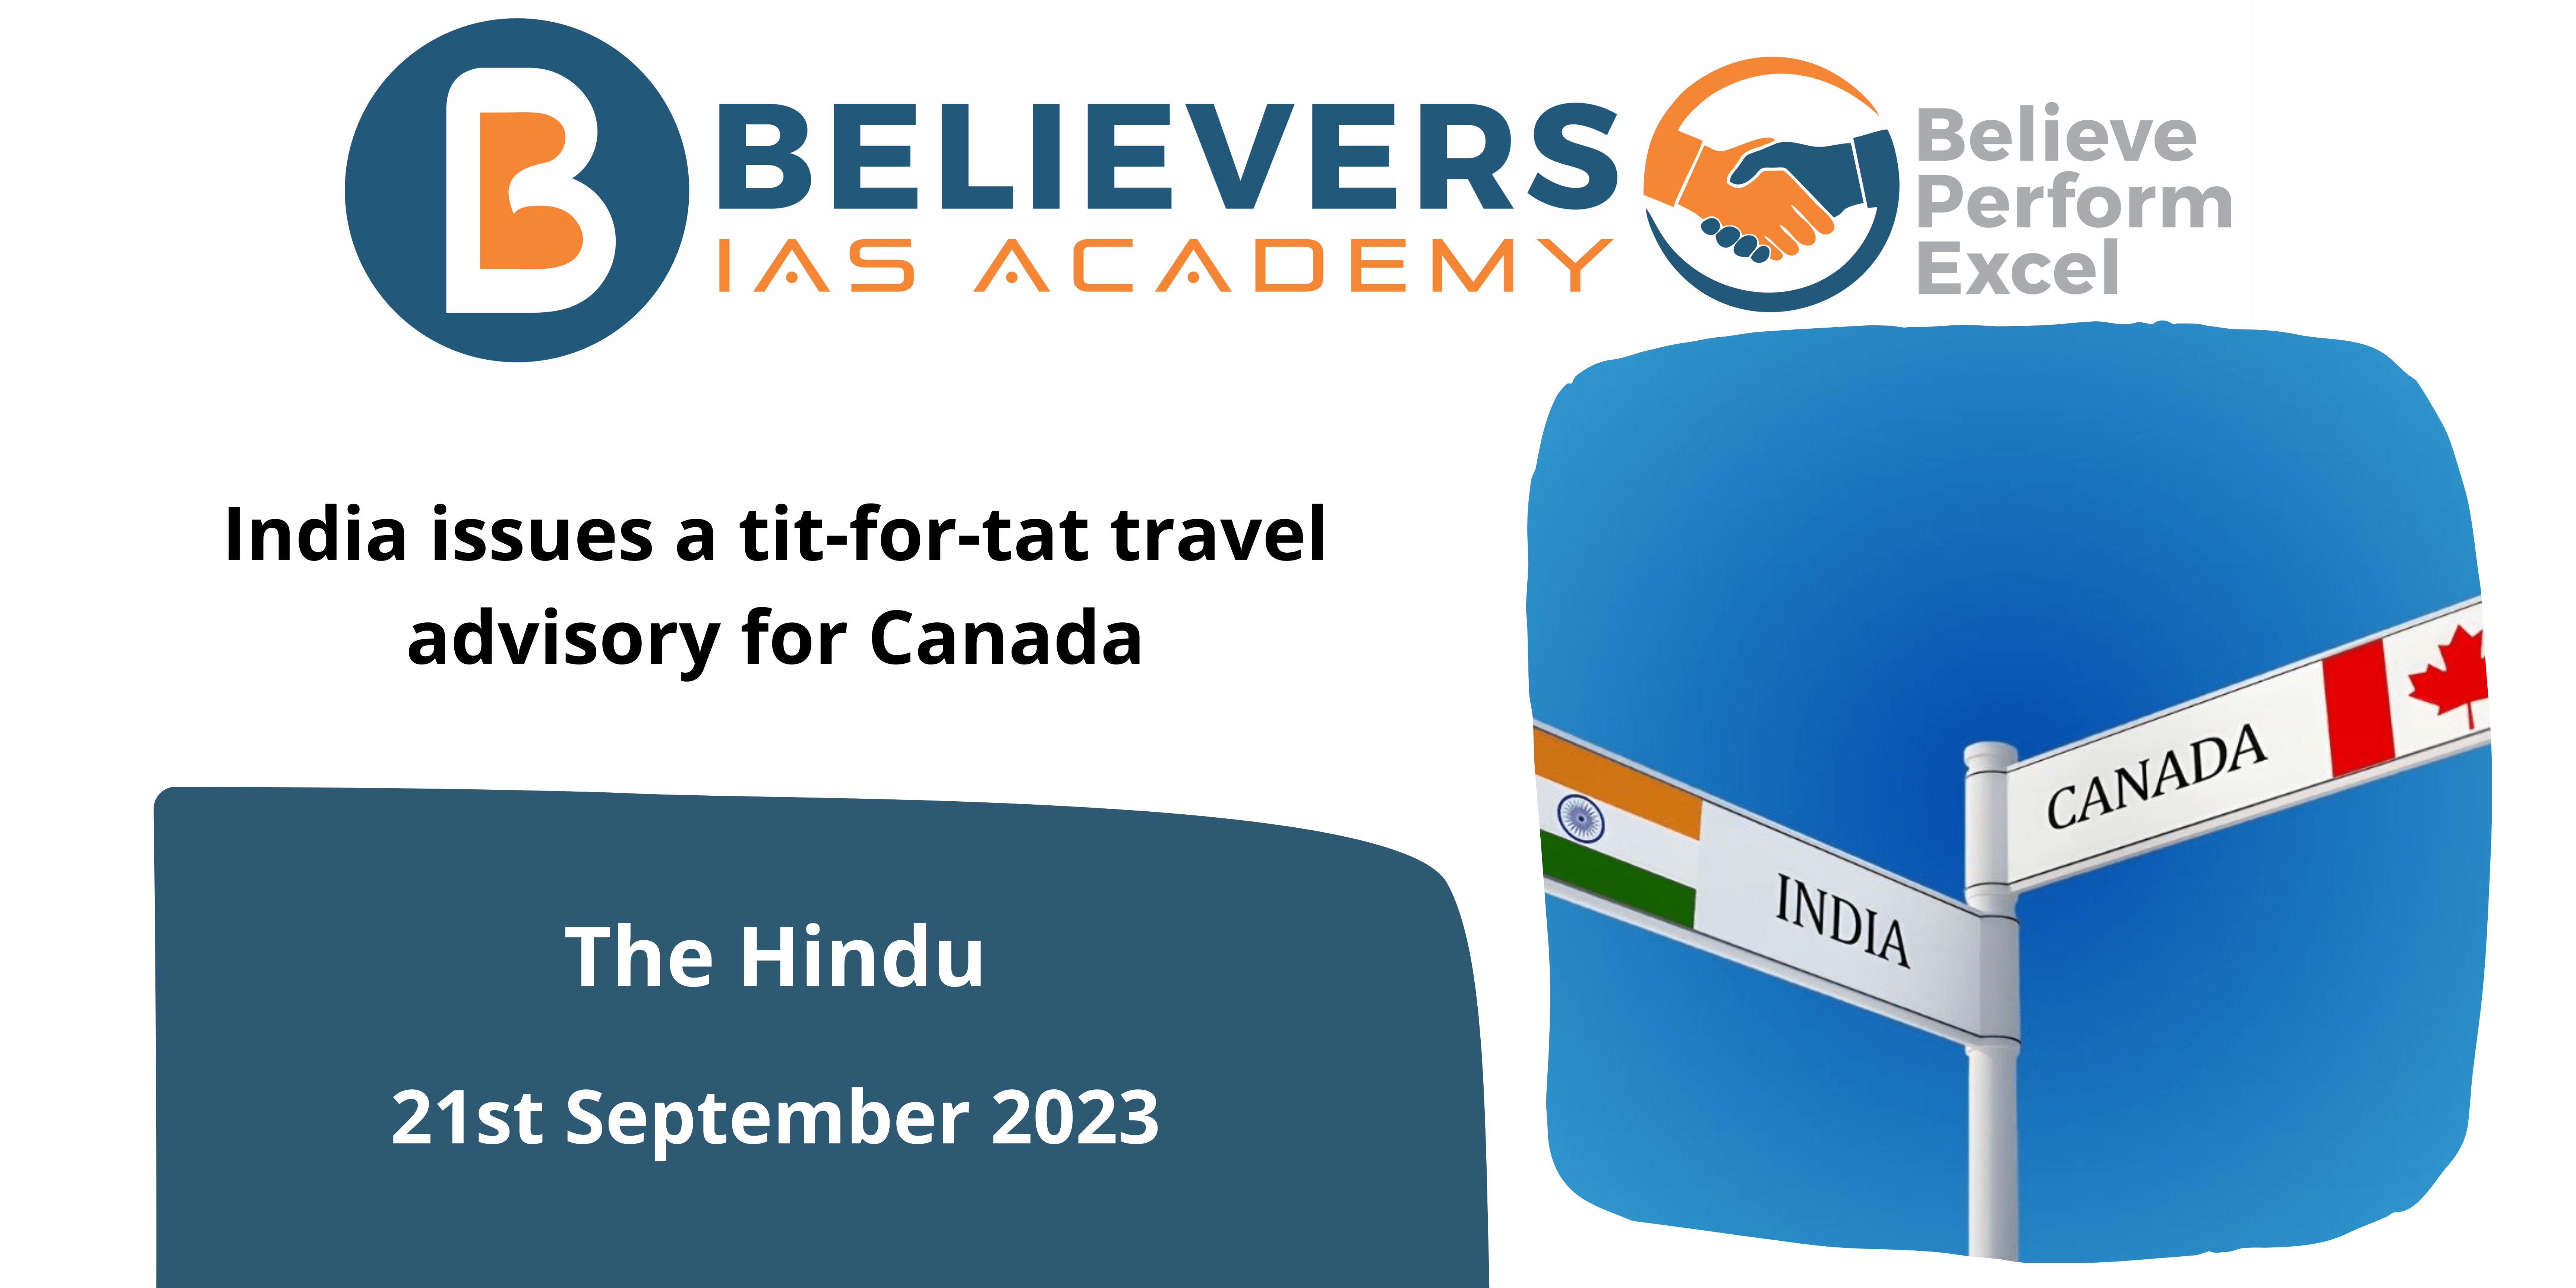 India issues a tit-for-tat travel advisory for Canada